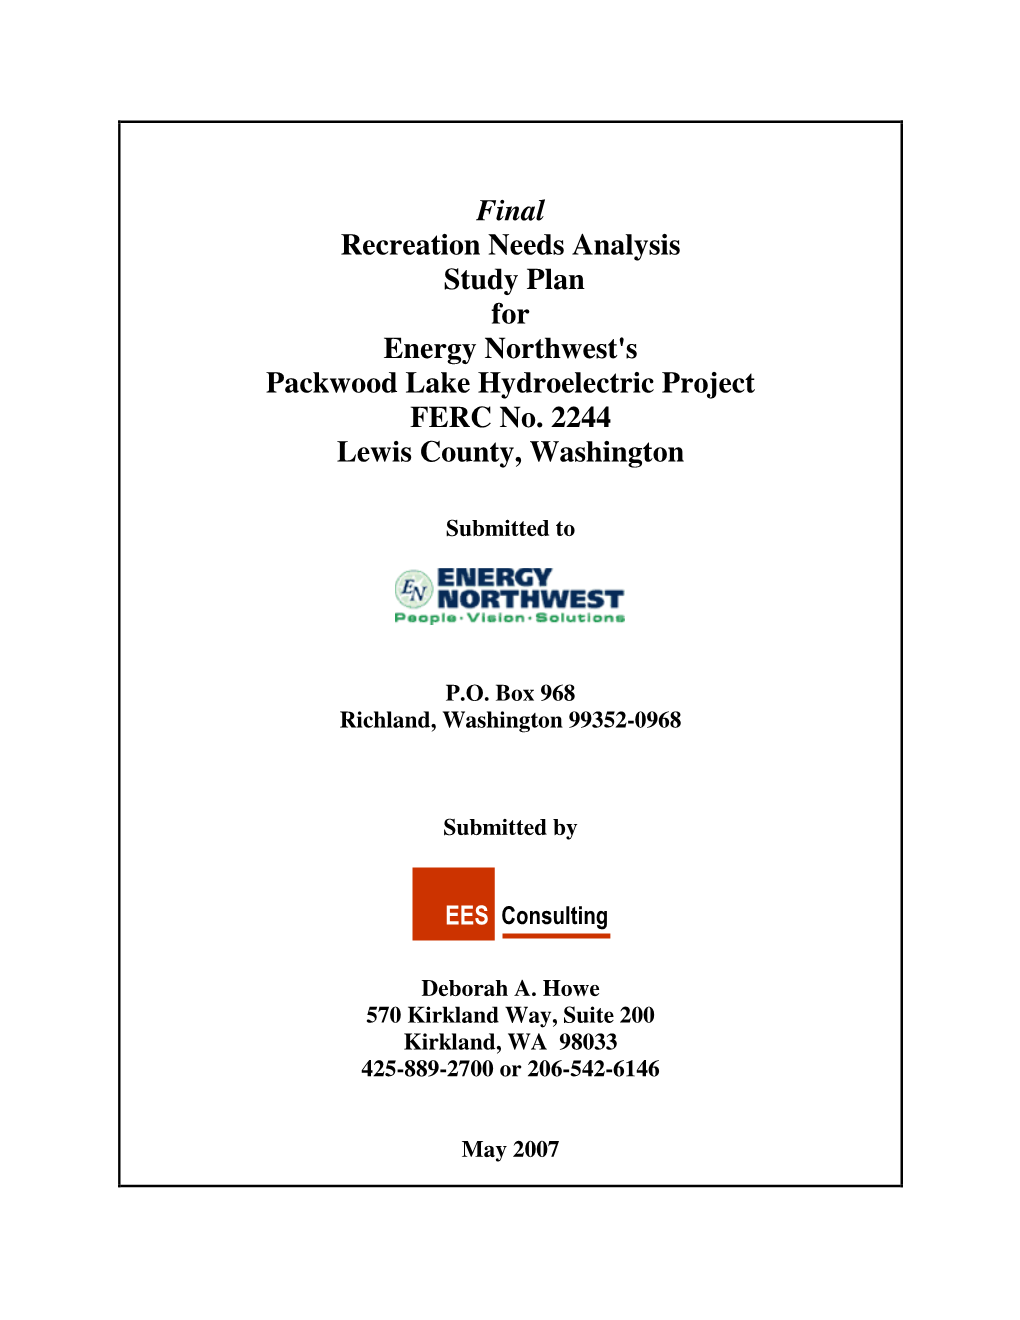 Final Recreation Needs Analysis Study Plan for Energy Northwest's Packwood Lake Hydroelectric Project FERC No. 2244 Lewis County, Washington